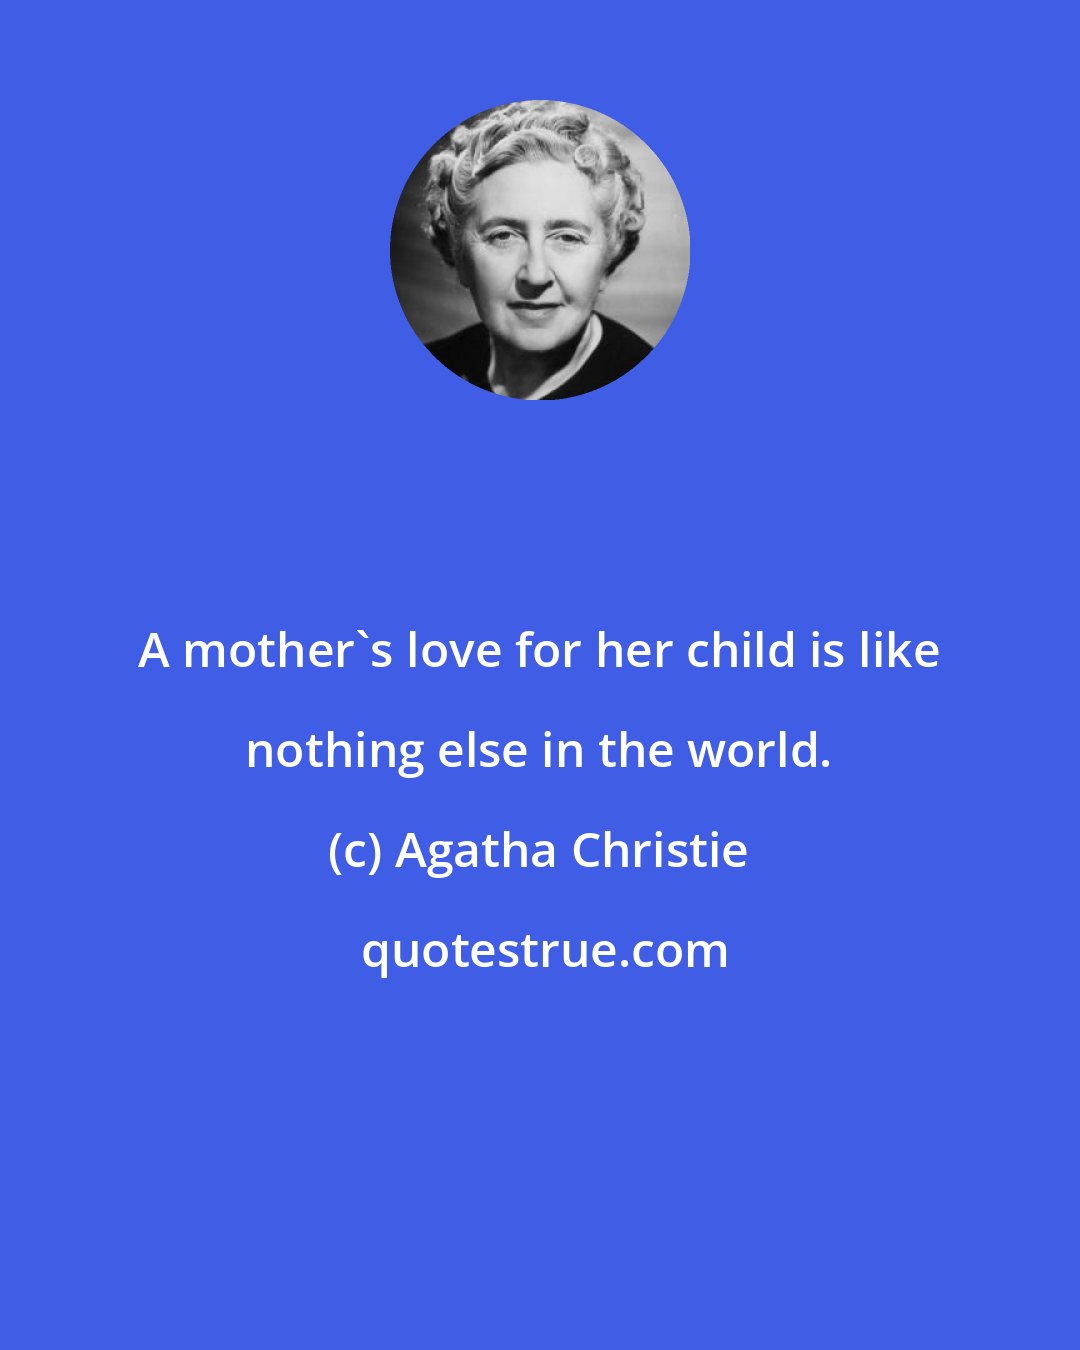 Agatha Christie: A mother's love for her child is like nothing else in the world.